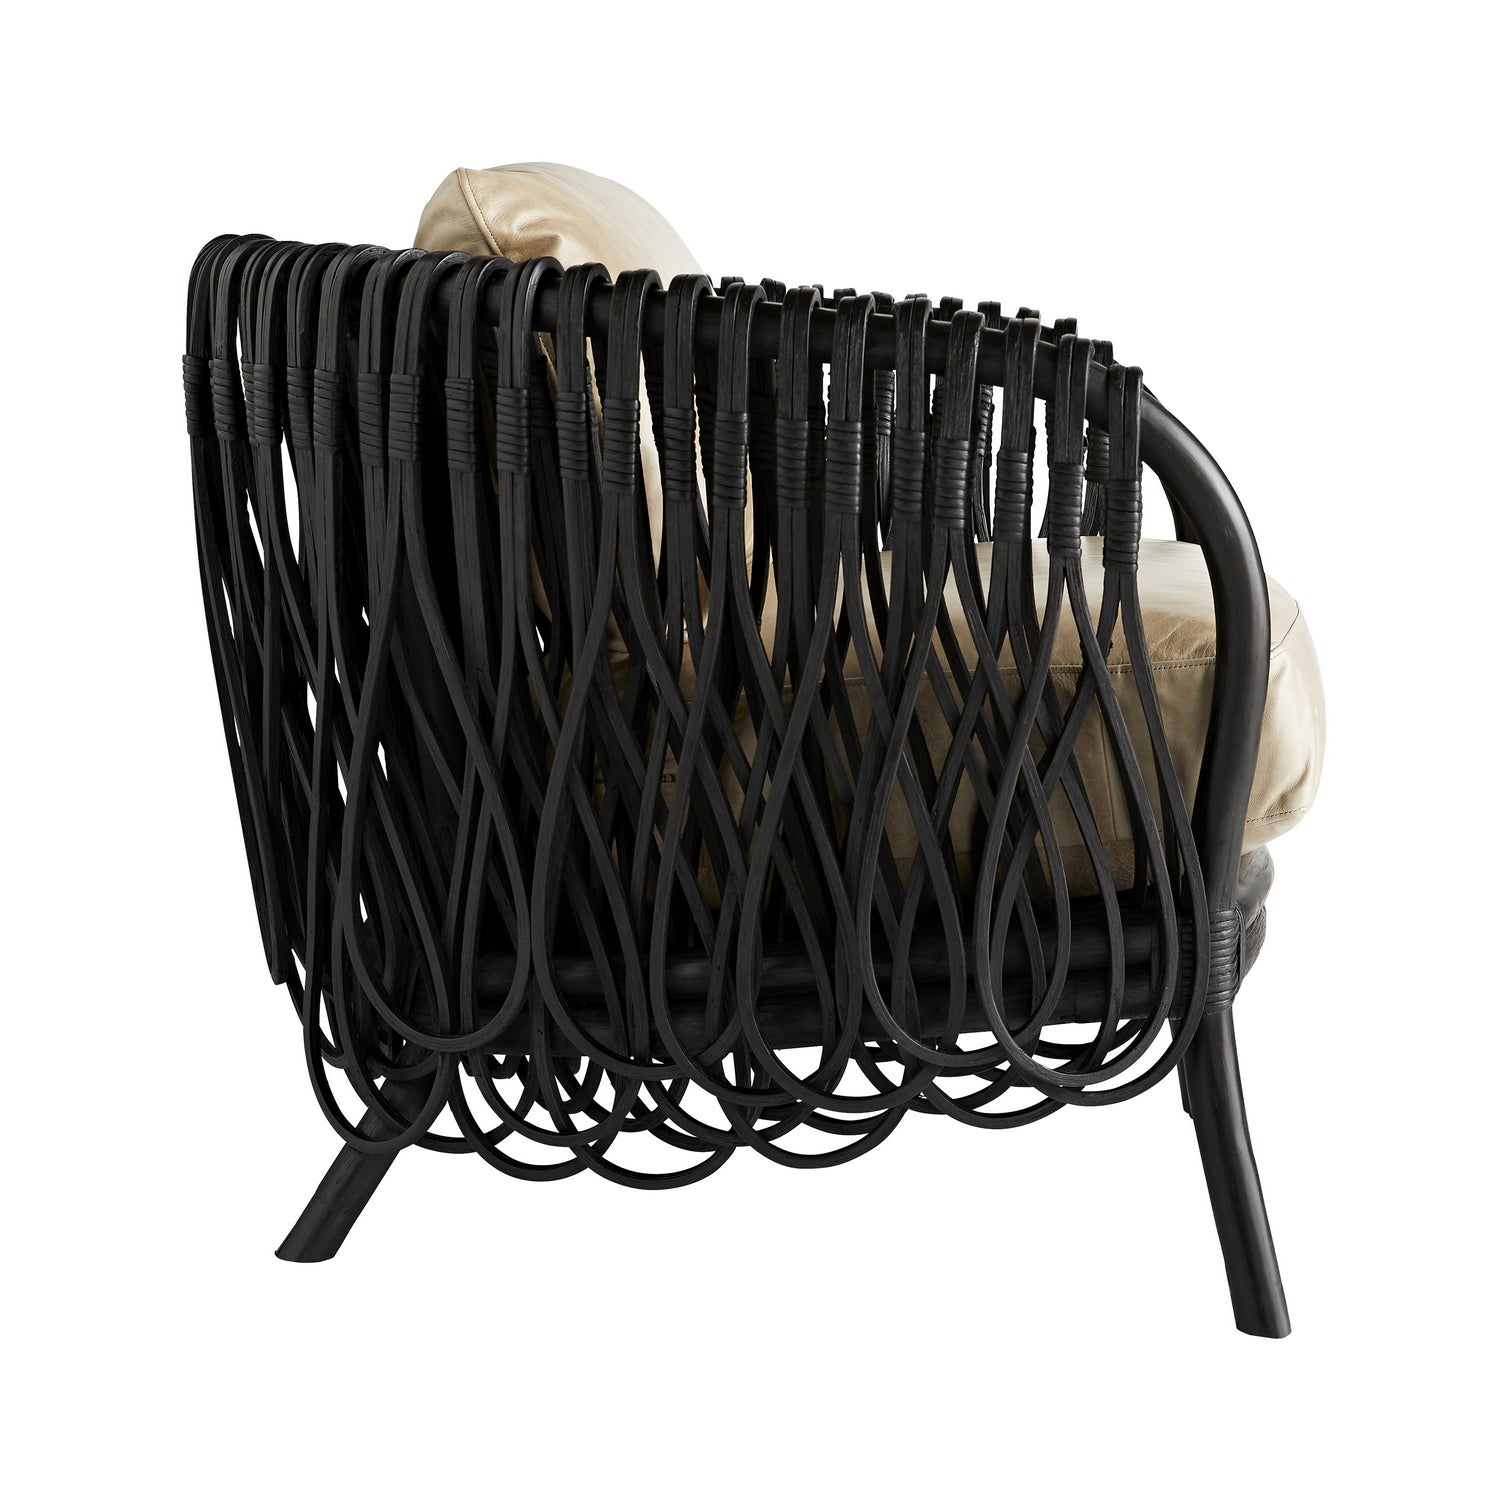 Lounge Chair from the Strata collection in Black finish